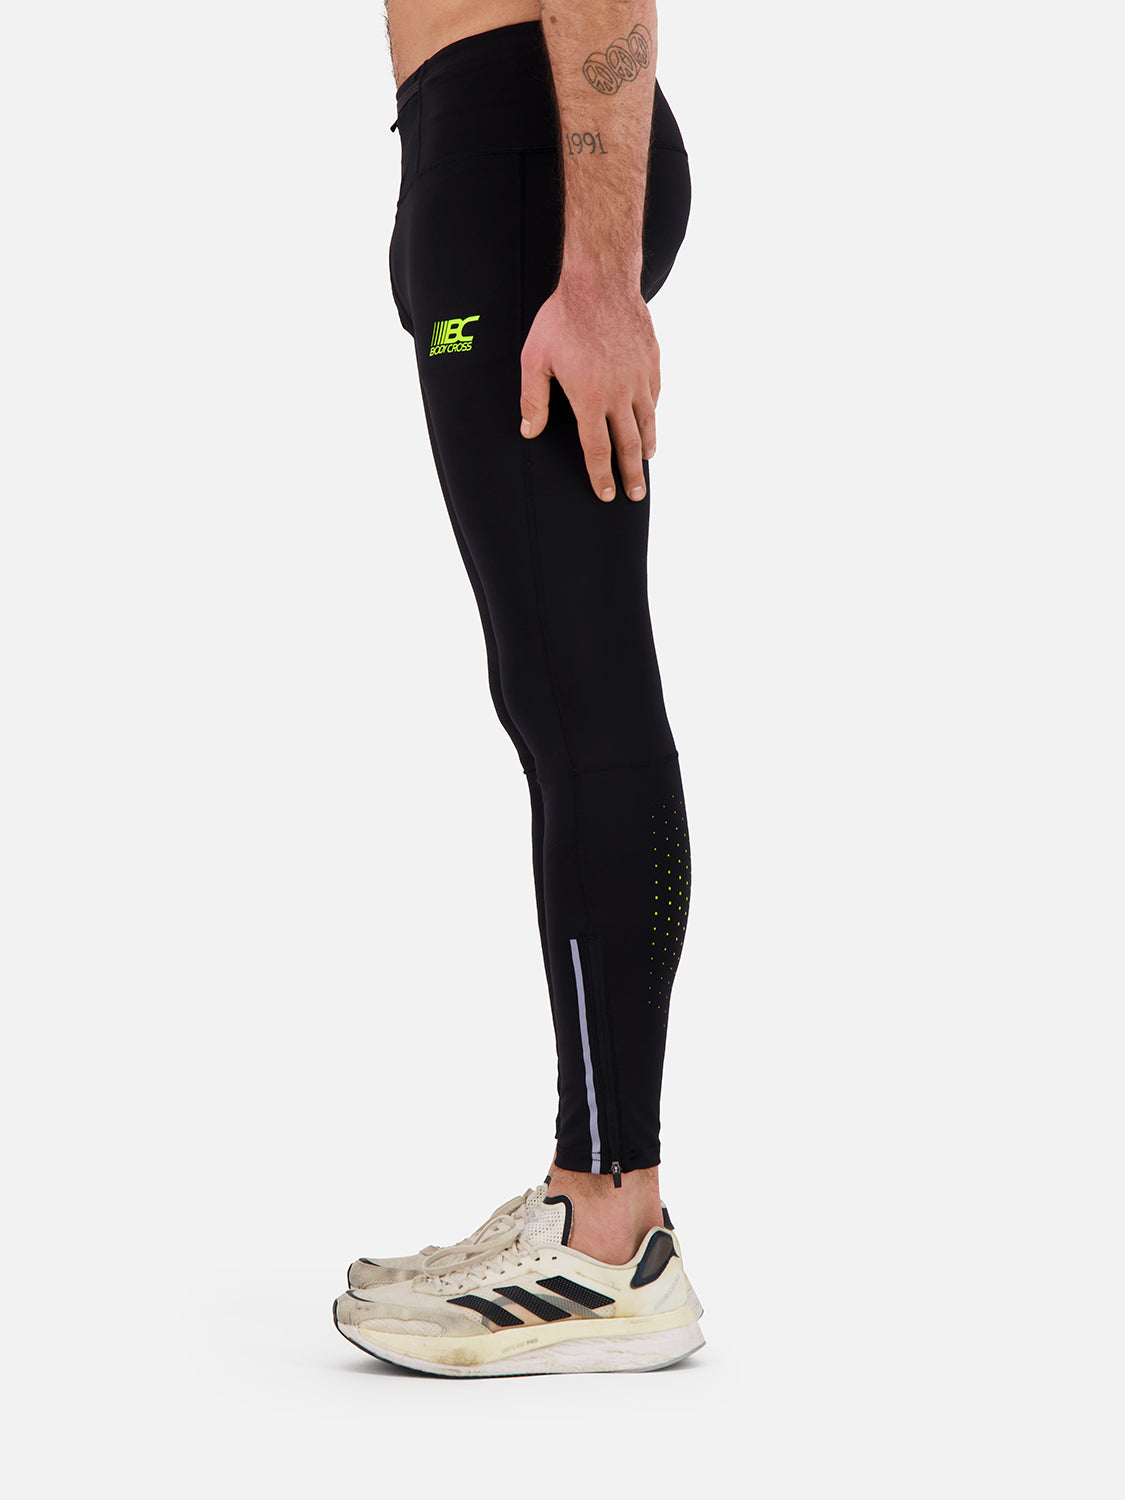 NIKE Black leggings with small logo in contrast on the bottom